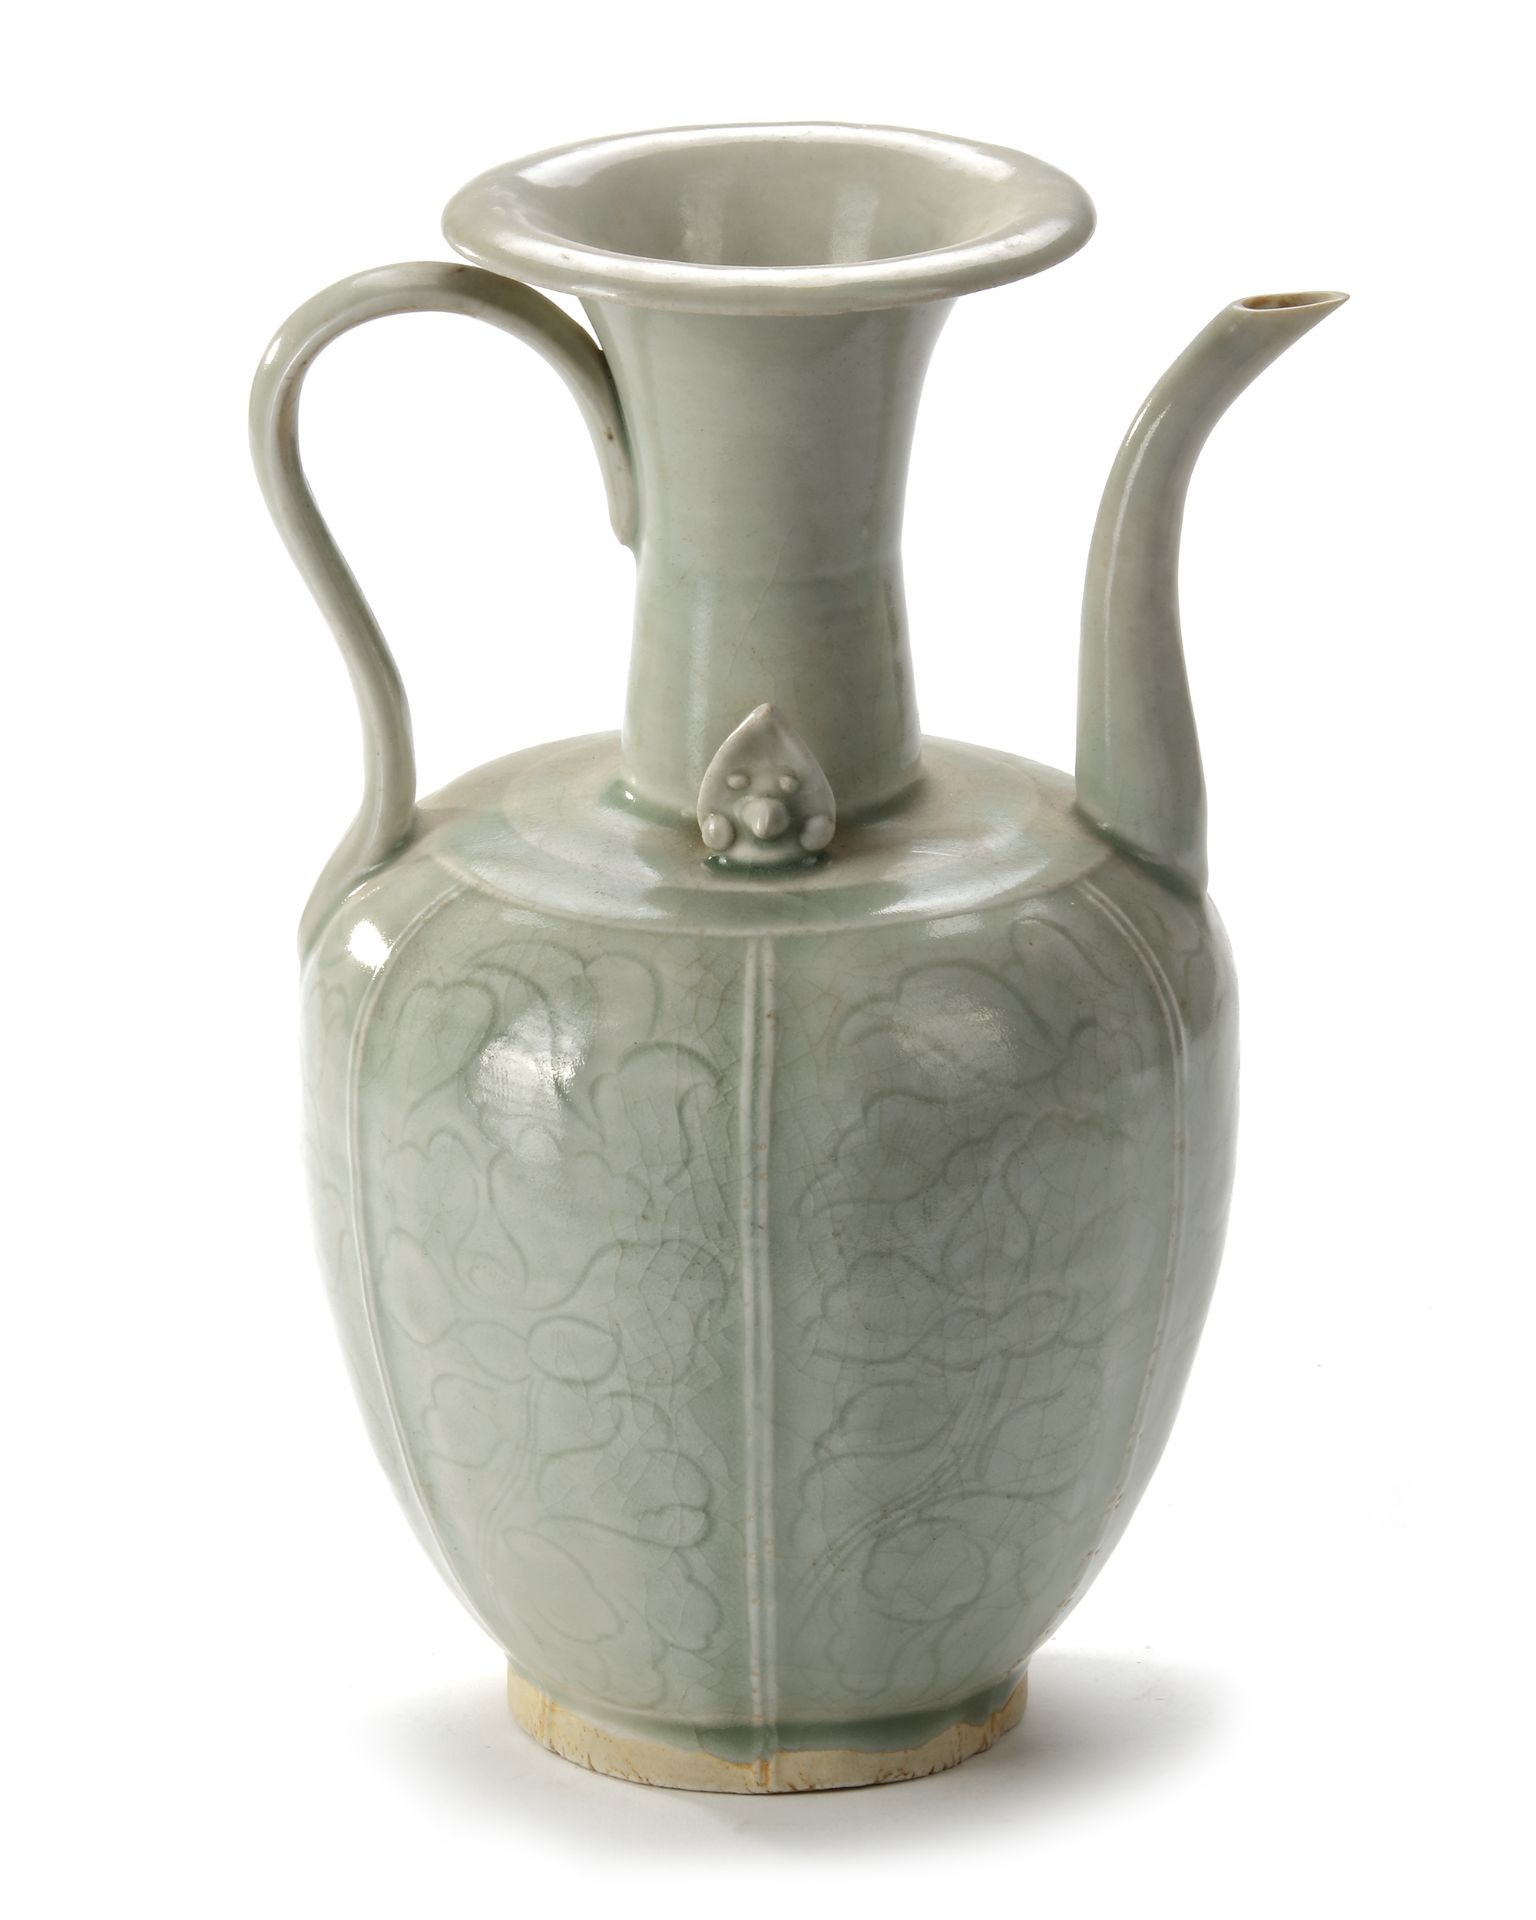 A CHINESE CELADON EWER, SONG DYNASTY (960-1279 AD) - Image 2 of 4